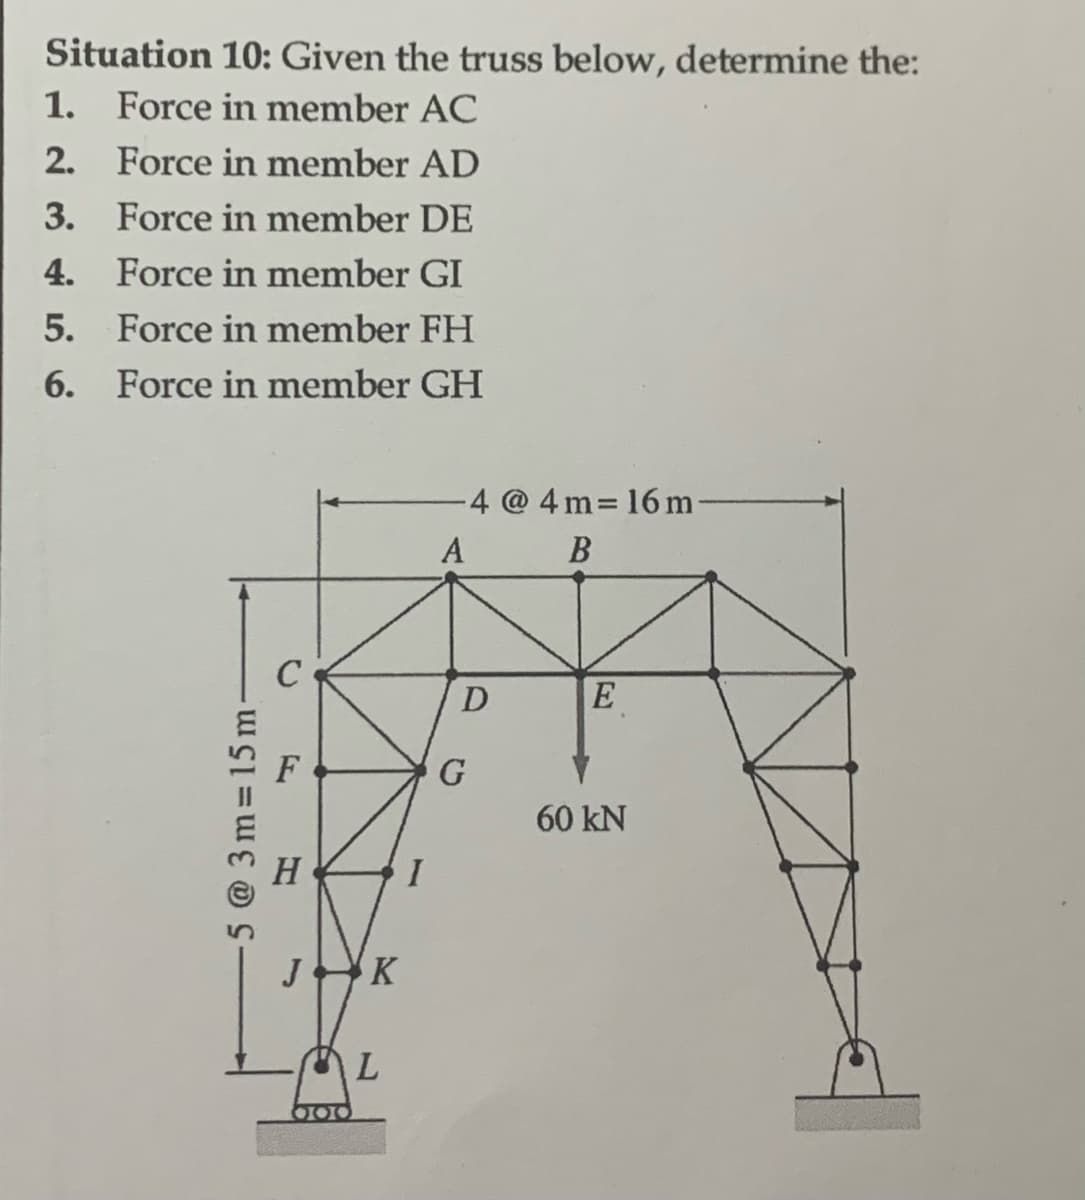 Situation 10: Given the truss below, determine the:
1. Force in member AC
2.
Force in member AD
3.
Force in member DE
4.
Force in member GI
5.
Force in member FH
6.
Force in member GH
-5 @ 3m= 15m-
с
J
000
K
L
I
-4
A
D
G
@4m- 16 m
B
E
60 KN